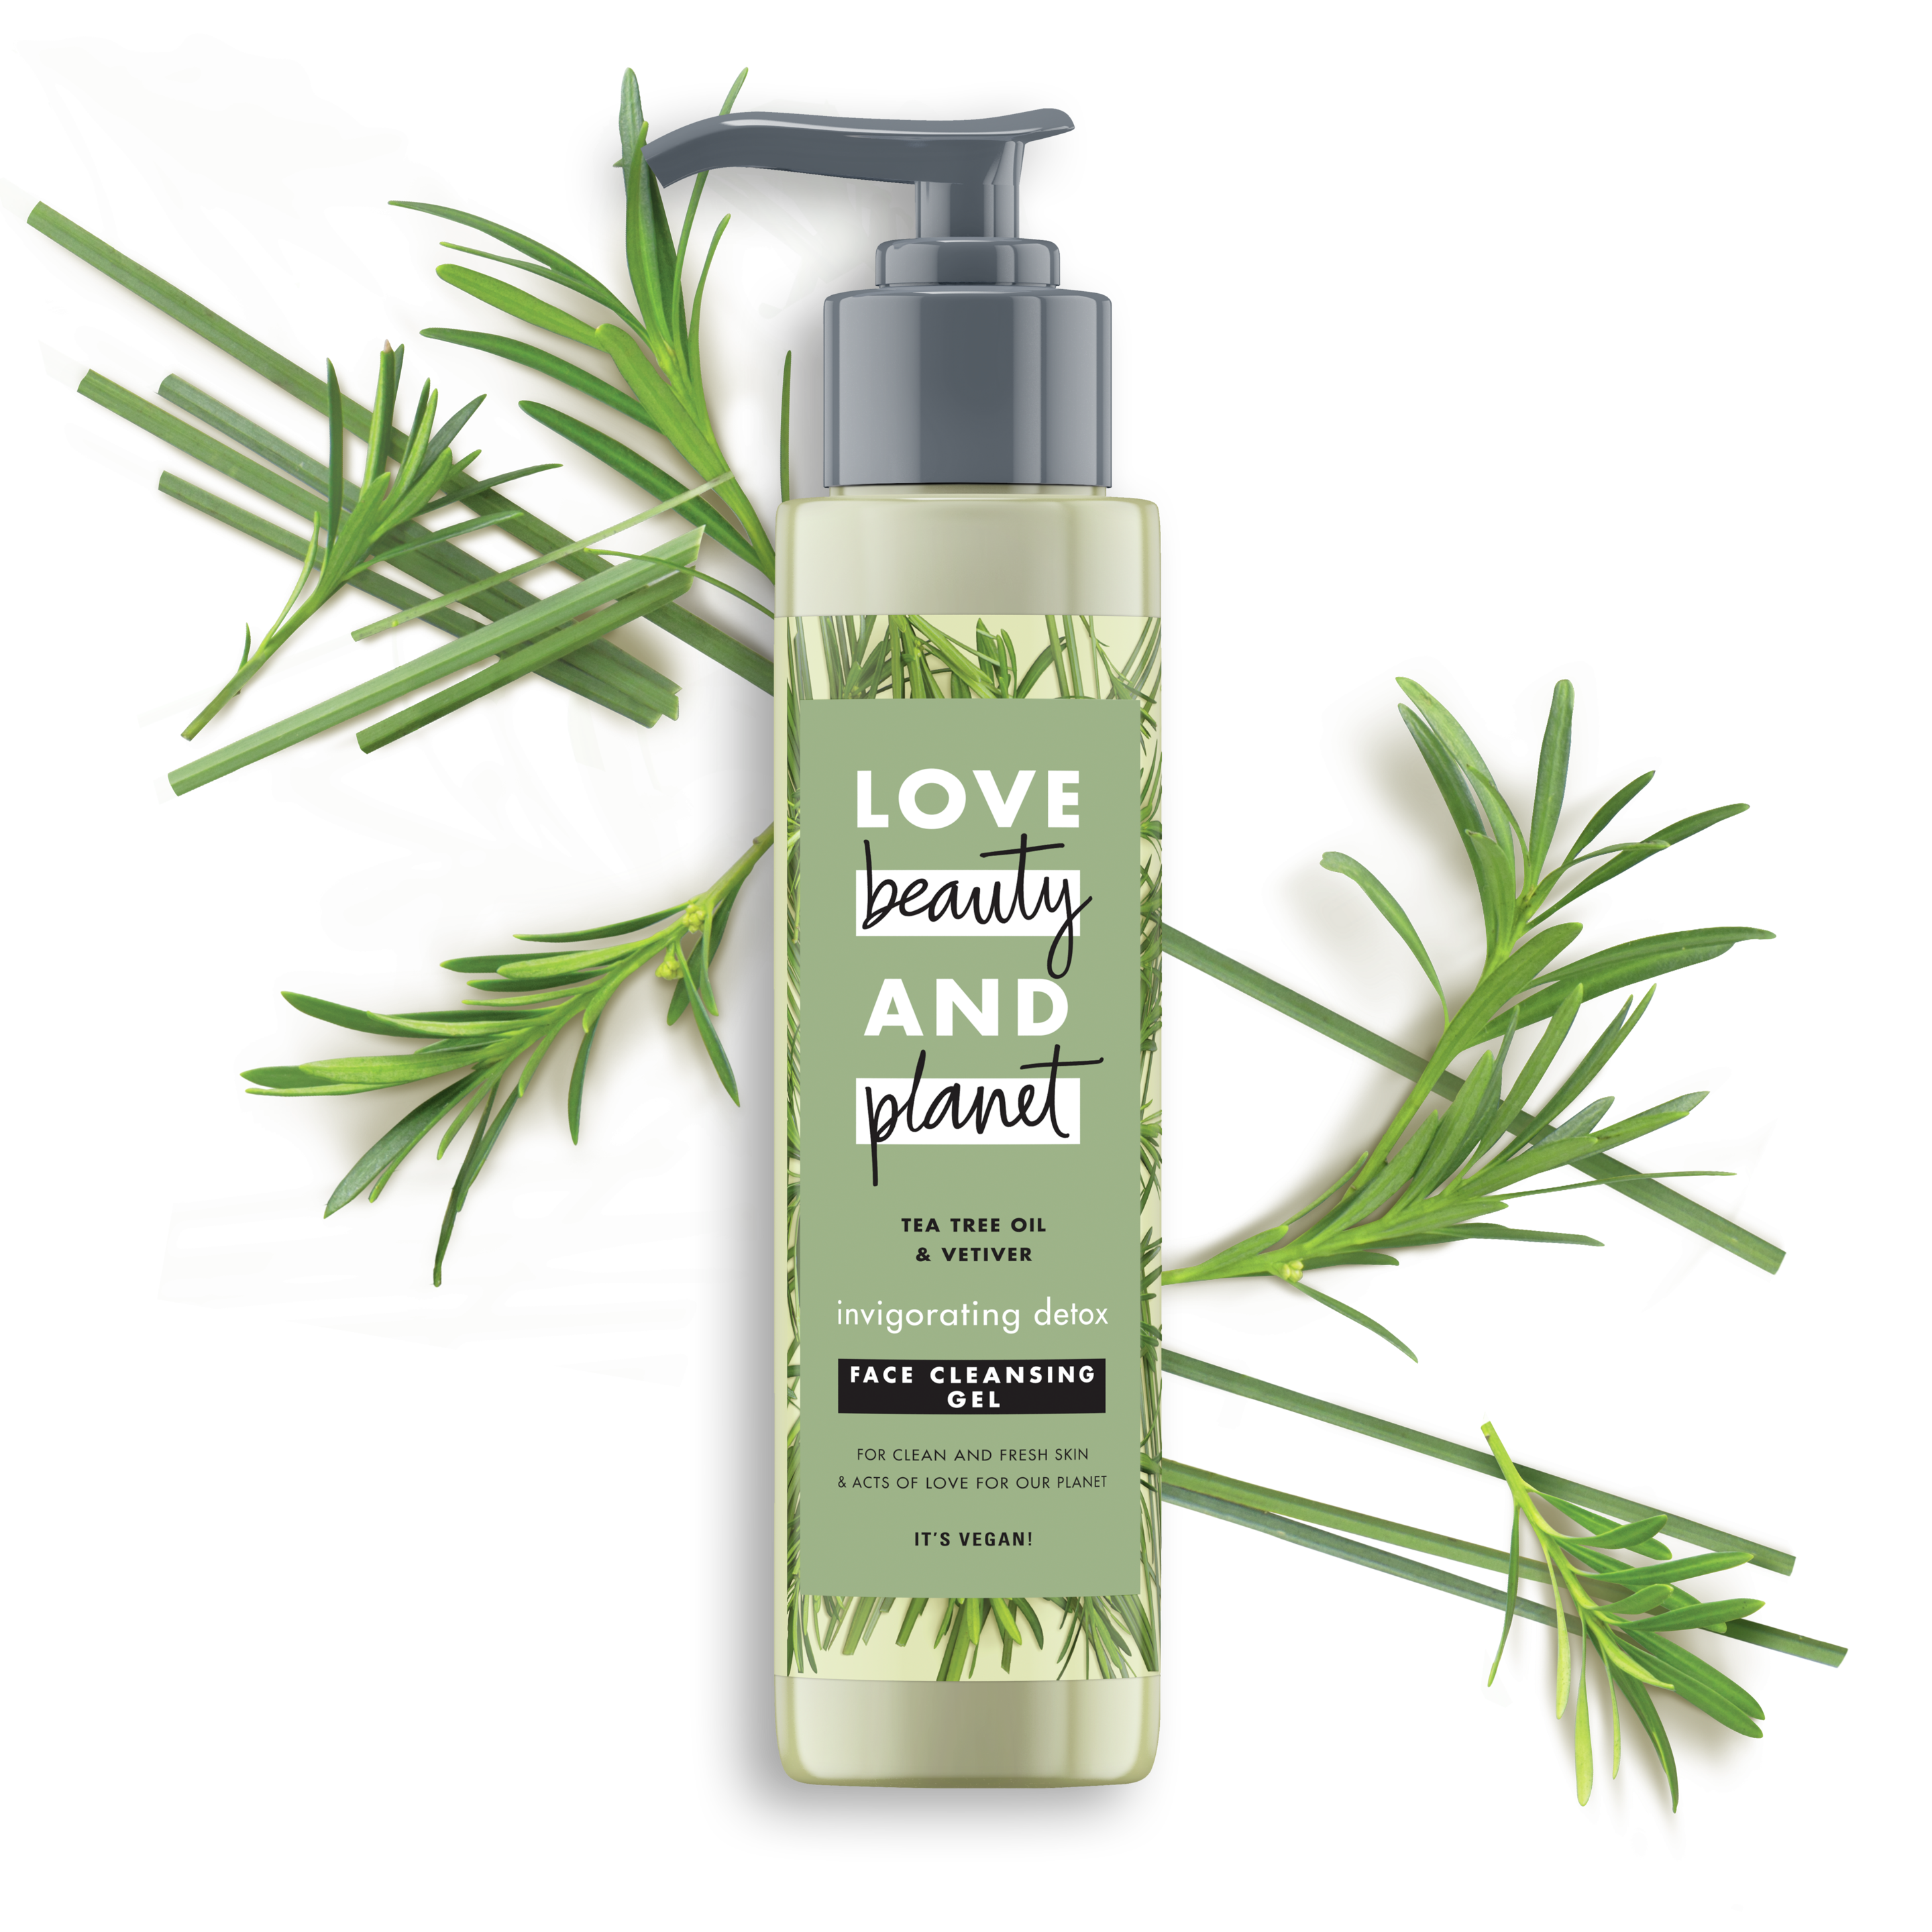 Front of face cleansing gel pack Love Beauty Planet Tea Tree Oil & Vetiver Face Cleansing Gel Invigorating Detox 125ml